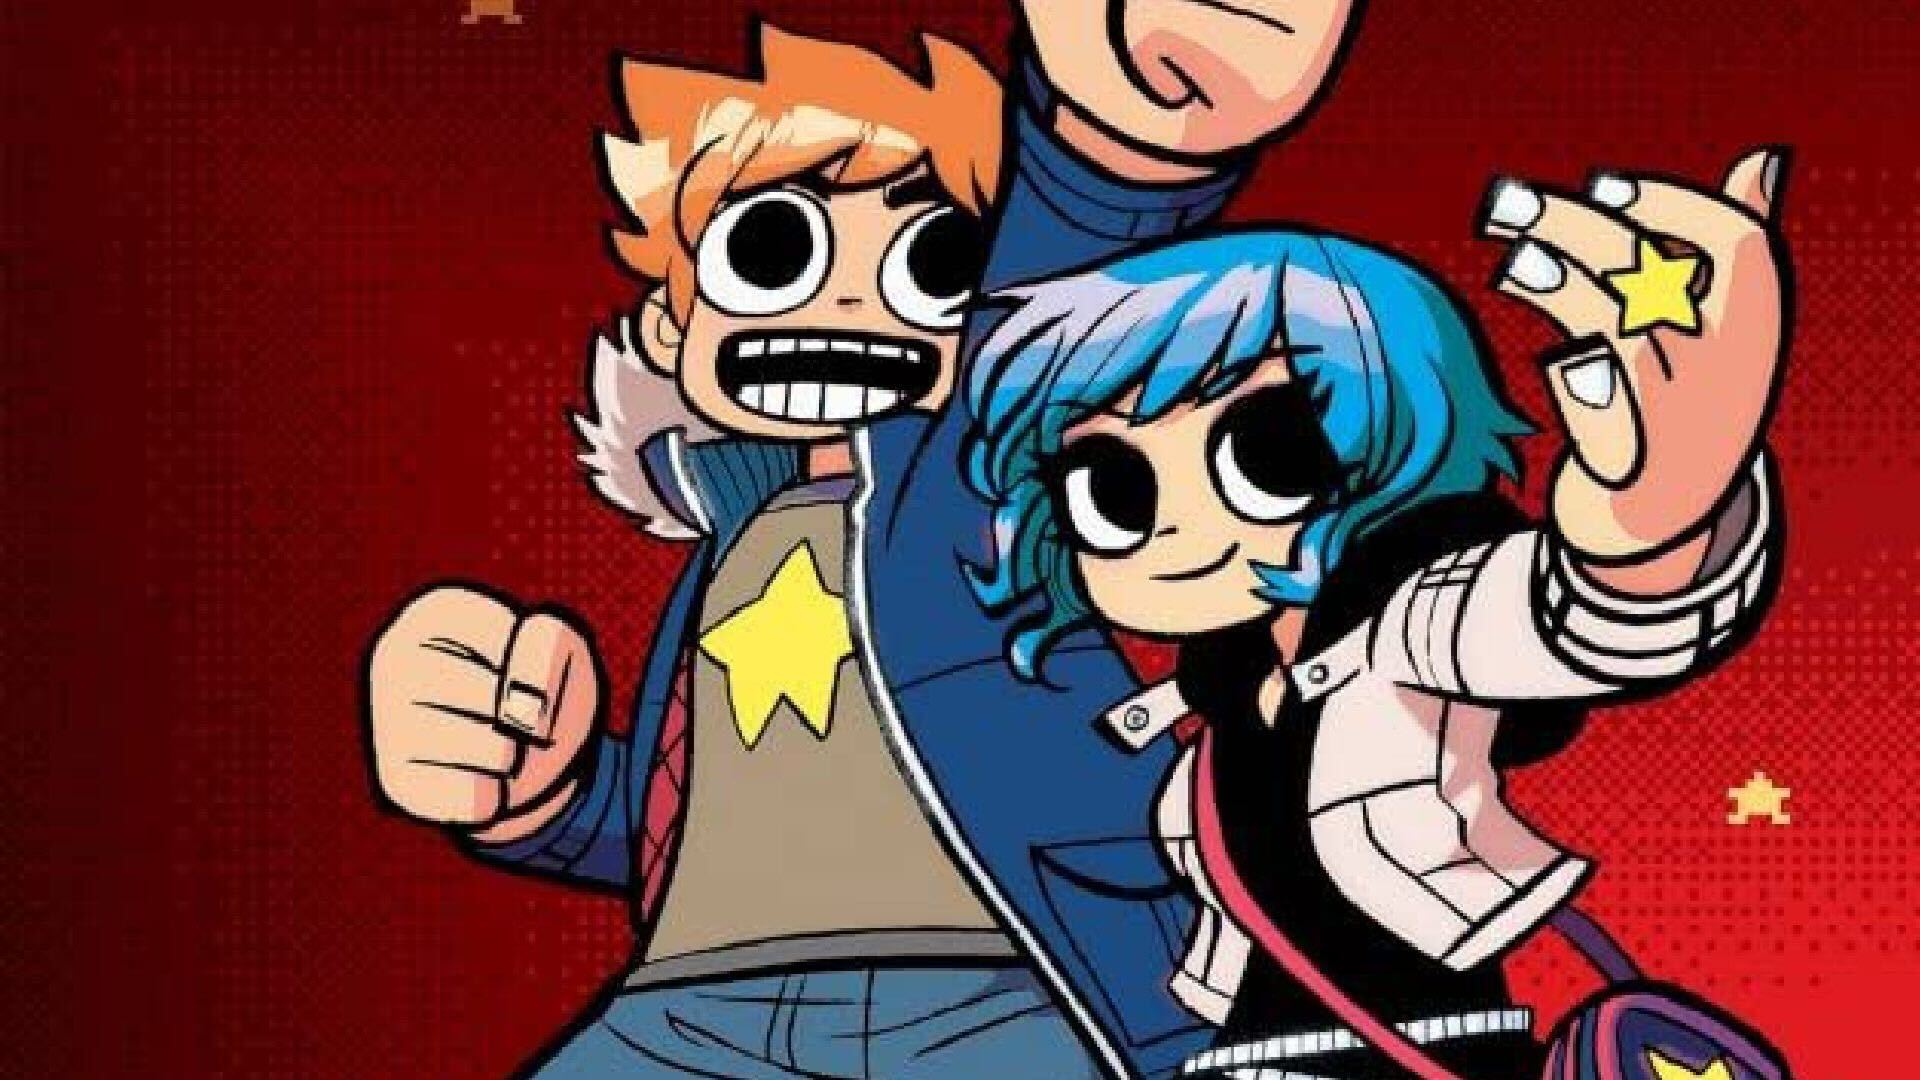 Scott Pilgrim Comic Series Movie Cartoon Funny Painting Poster Prints  Canvas Wall Picture for Home Room Aesthetic Wall Decor 16x24in Unframed :  Buy Online at Best Price in KSA - Souq is